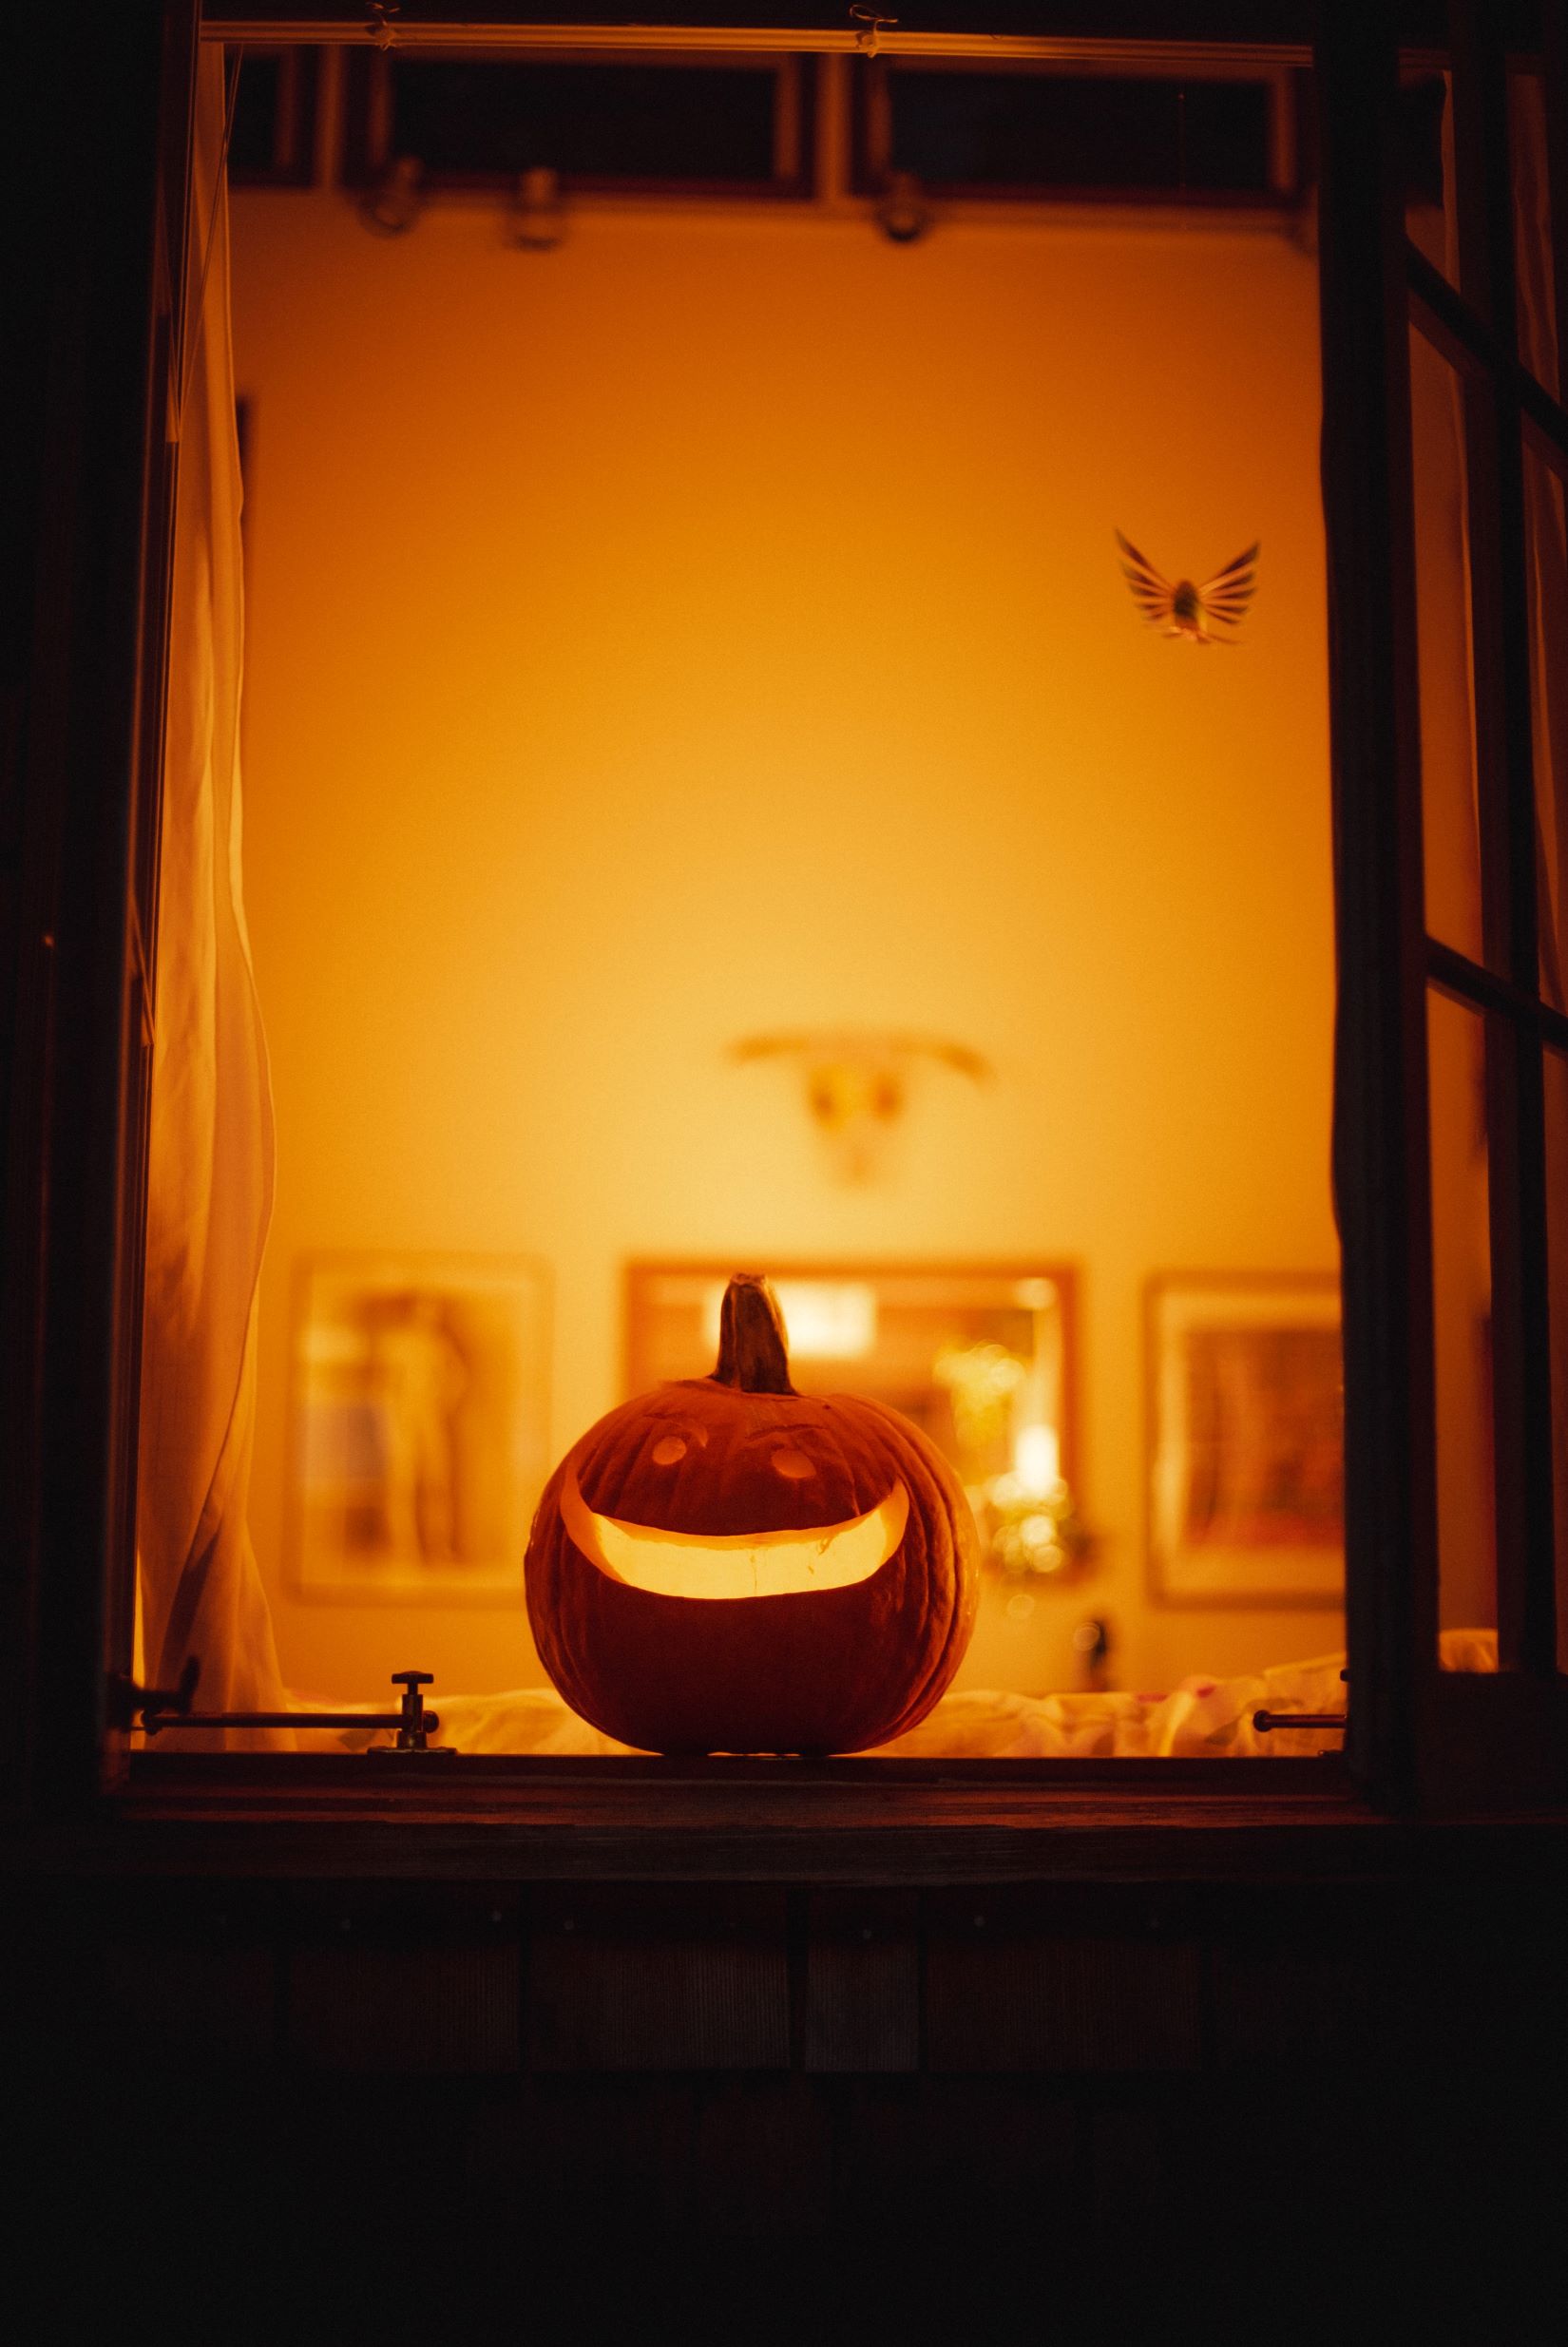 An image of a jack-o'-lantern in a window.